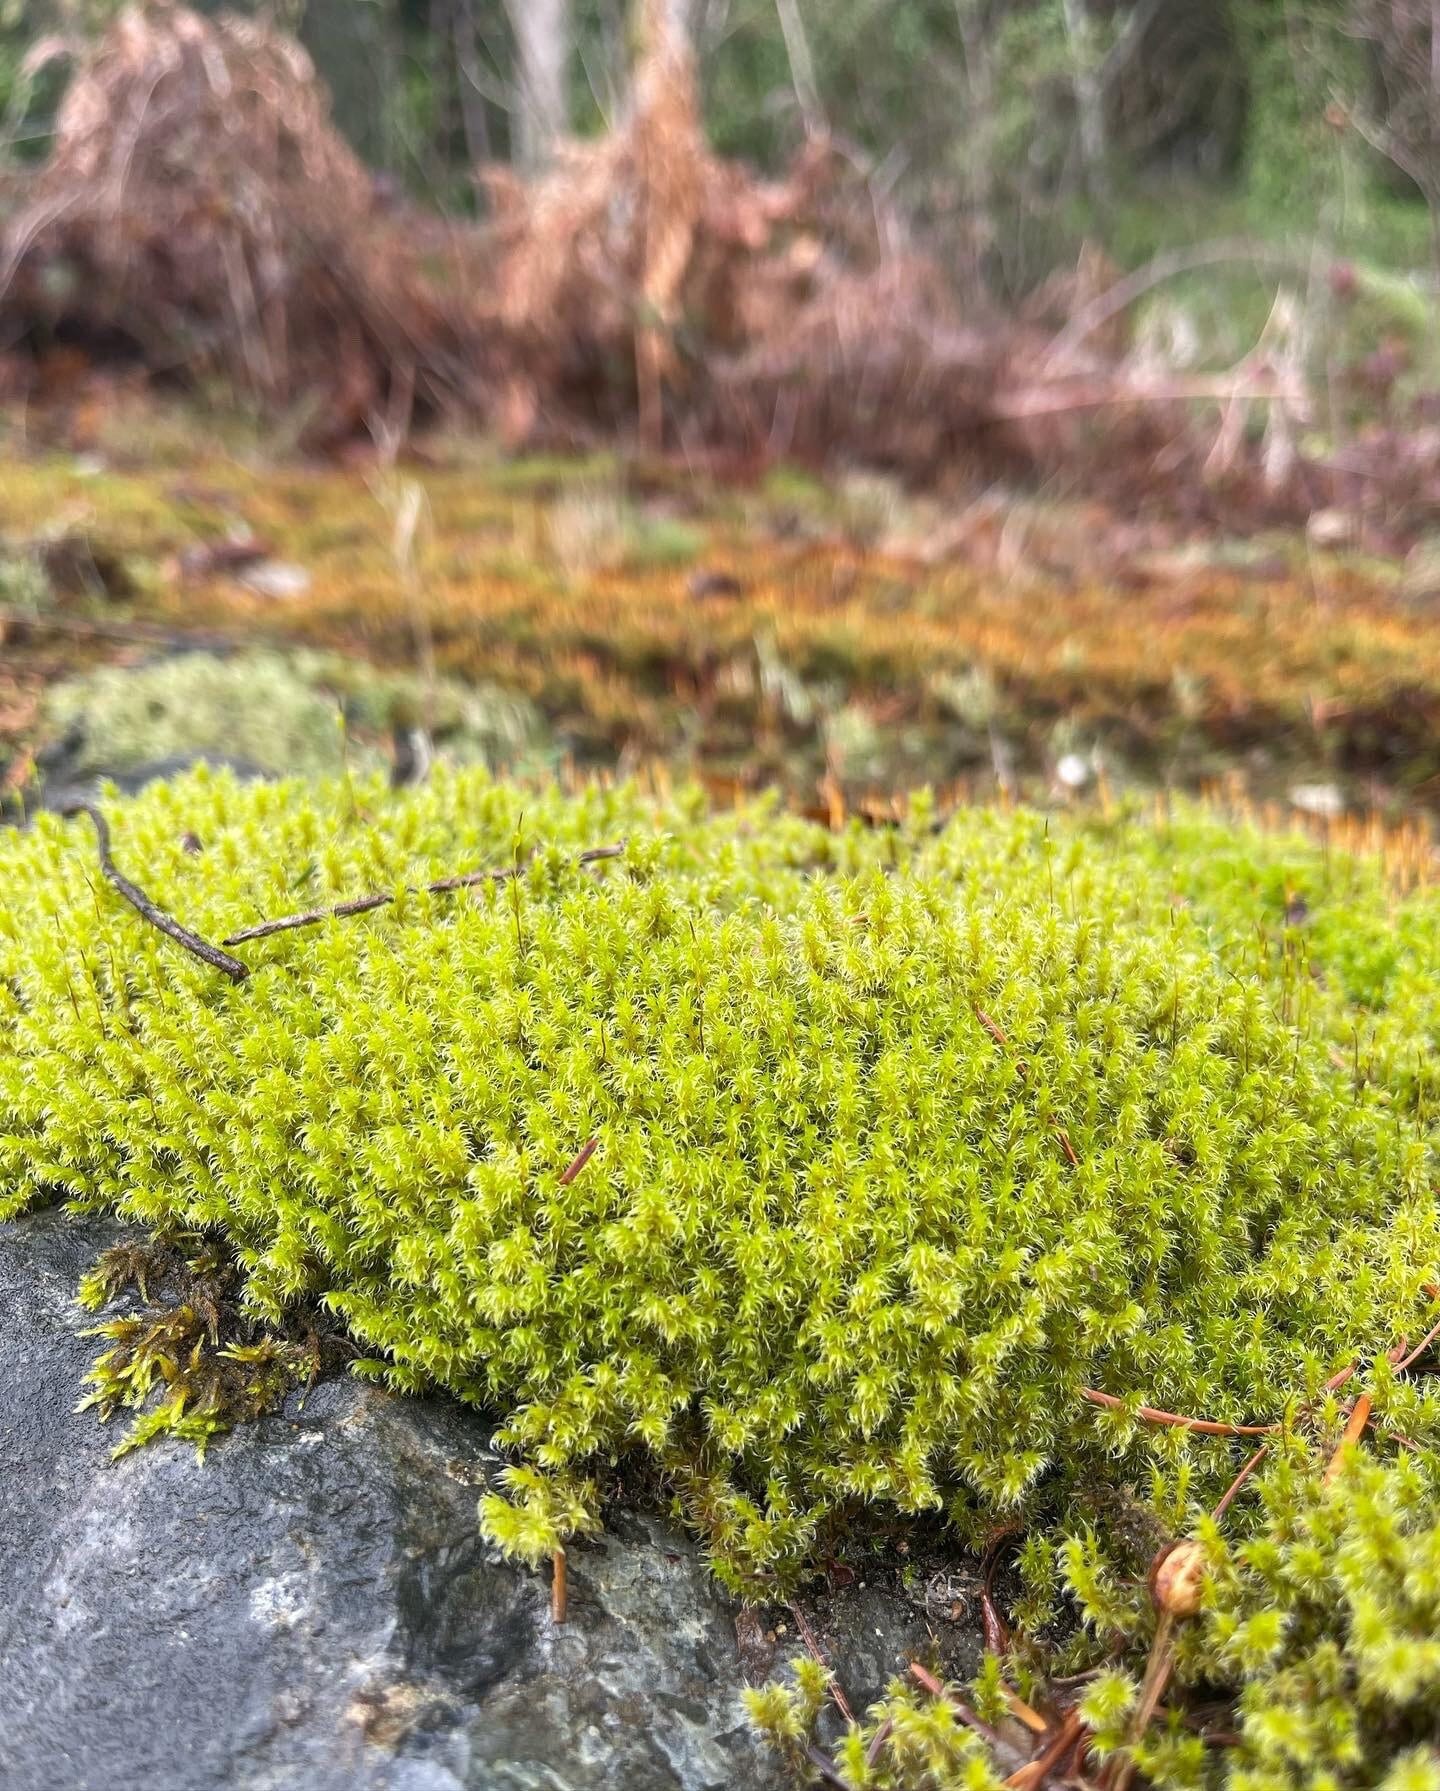 Live Fresh Sphagnum Moss Healthy for Terrariums Orchids